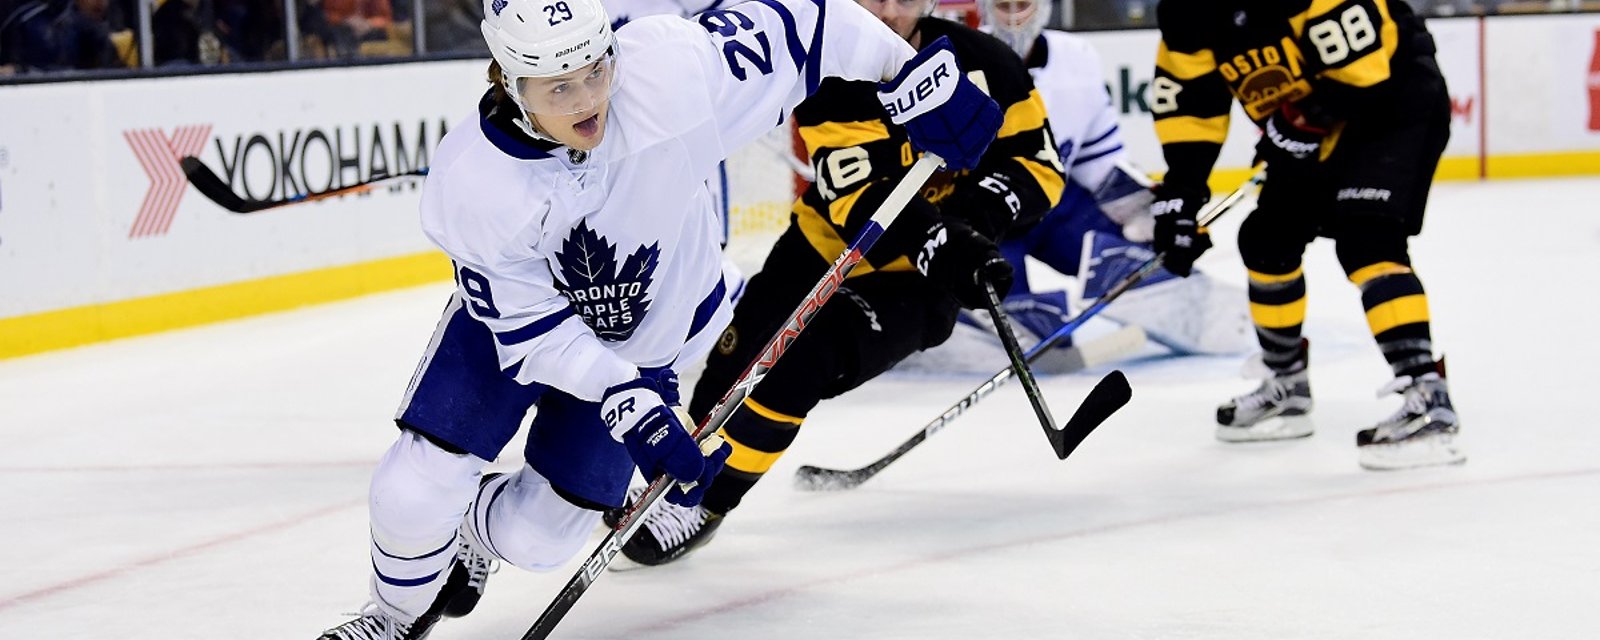 Breaking: Big change for William Nylander, could mean big things for the Leafs,